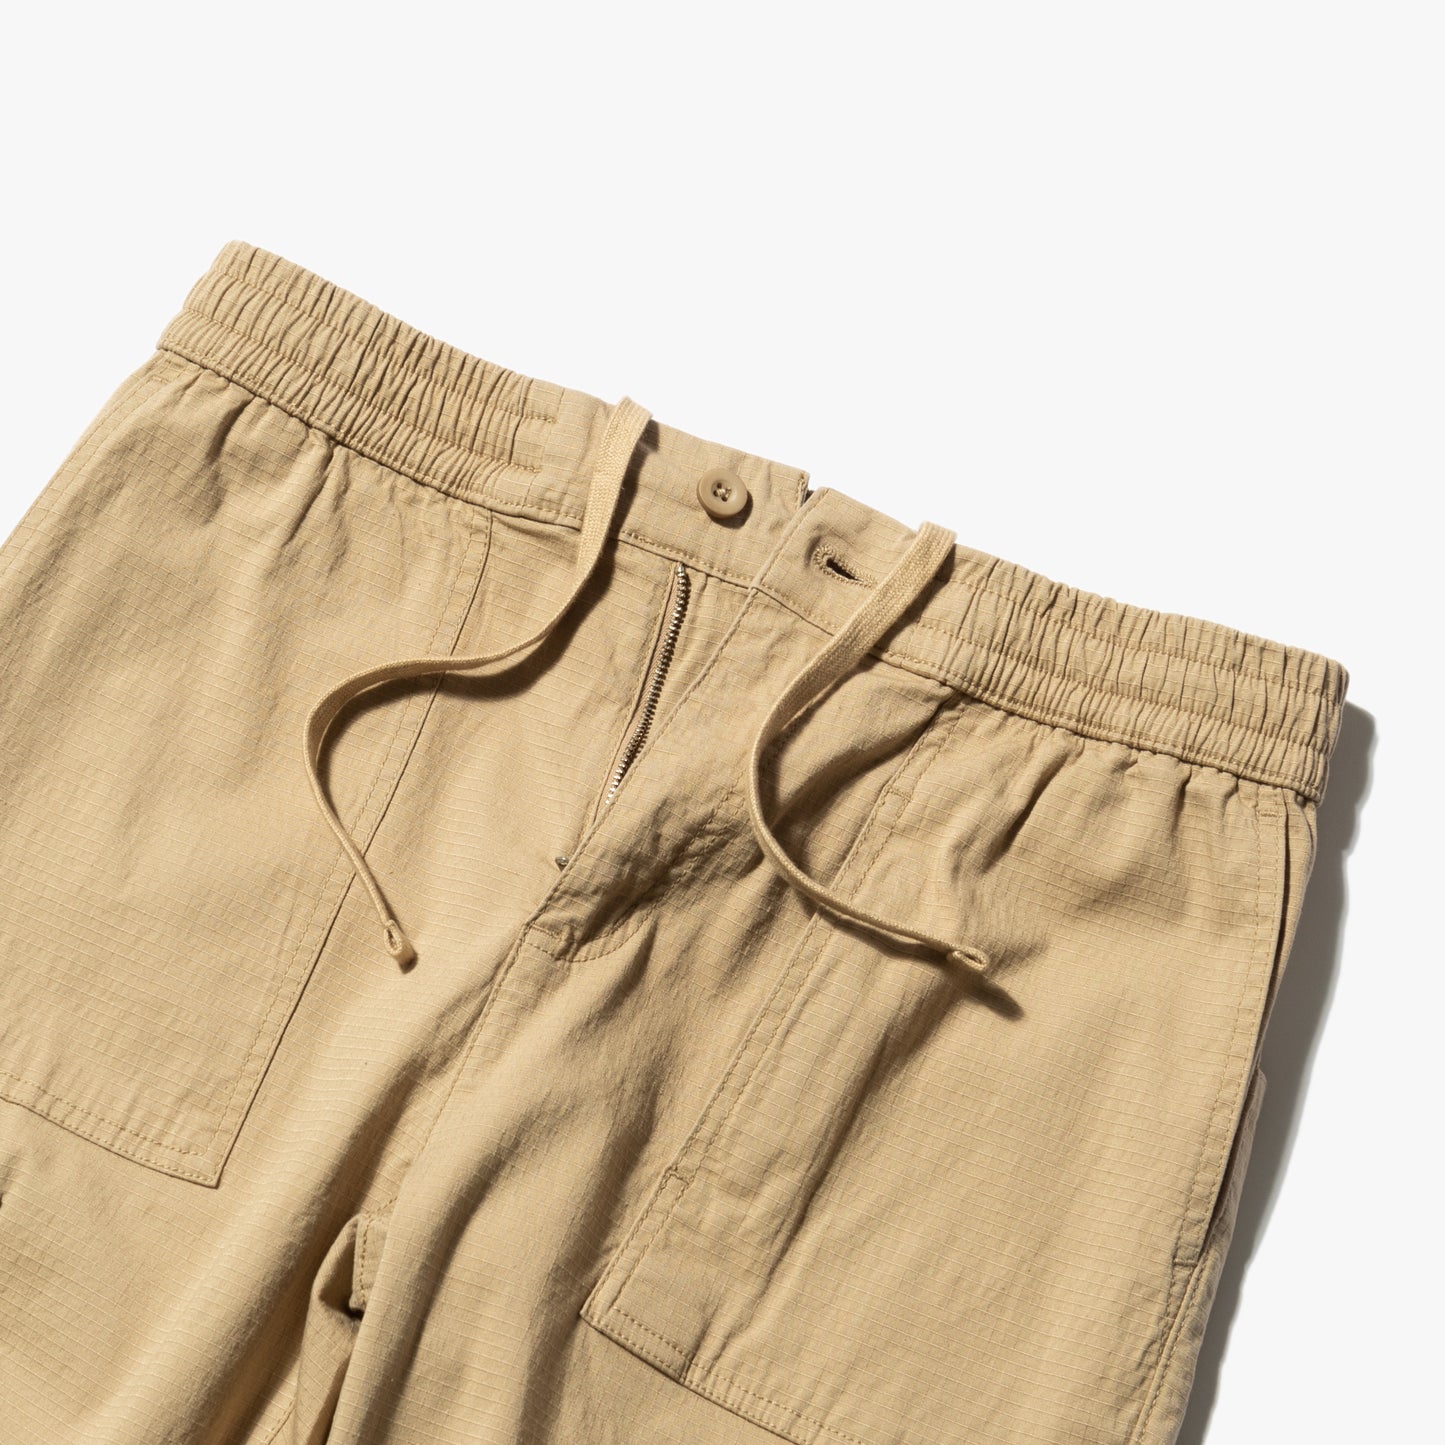 Rip Twill ripstop Cargo Pant  (Sand)